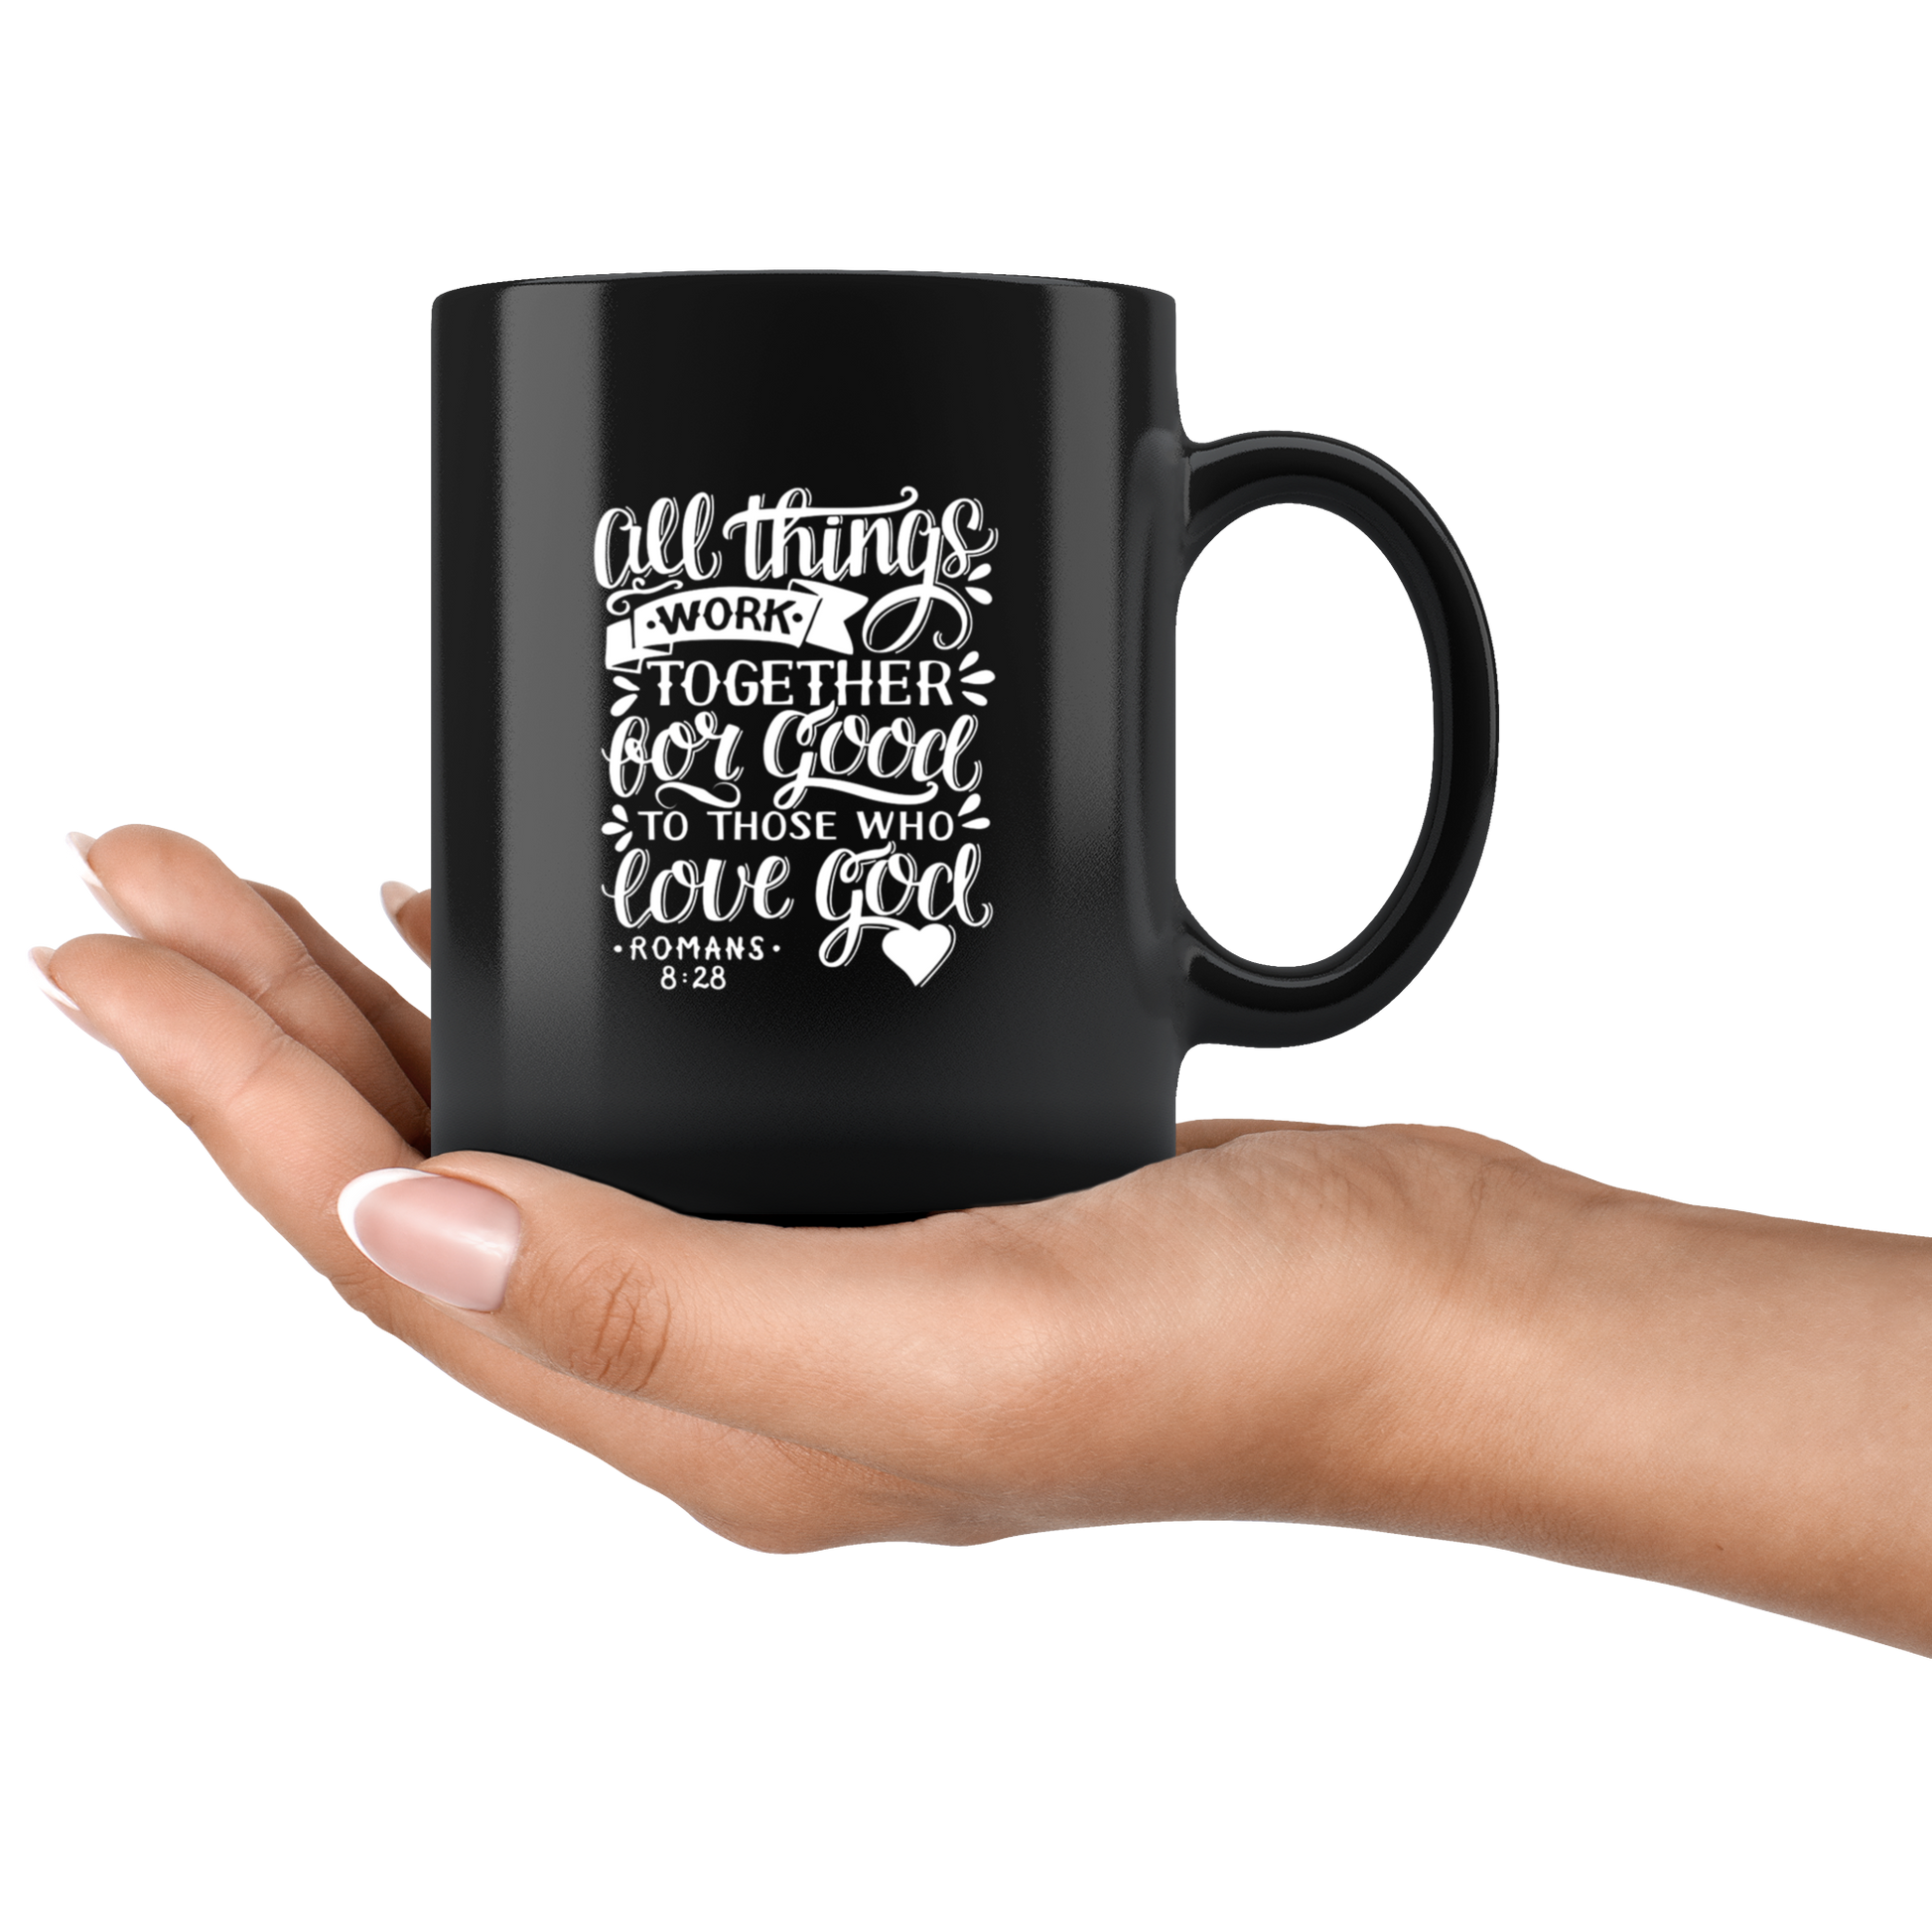 All Things Work Together For Good To Those Who Love God, Romans 8:28 - Black 11oz Mug held in female palm